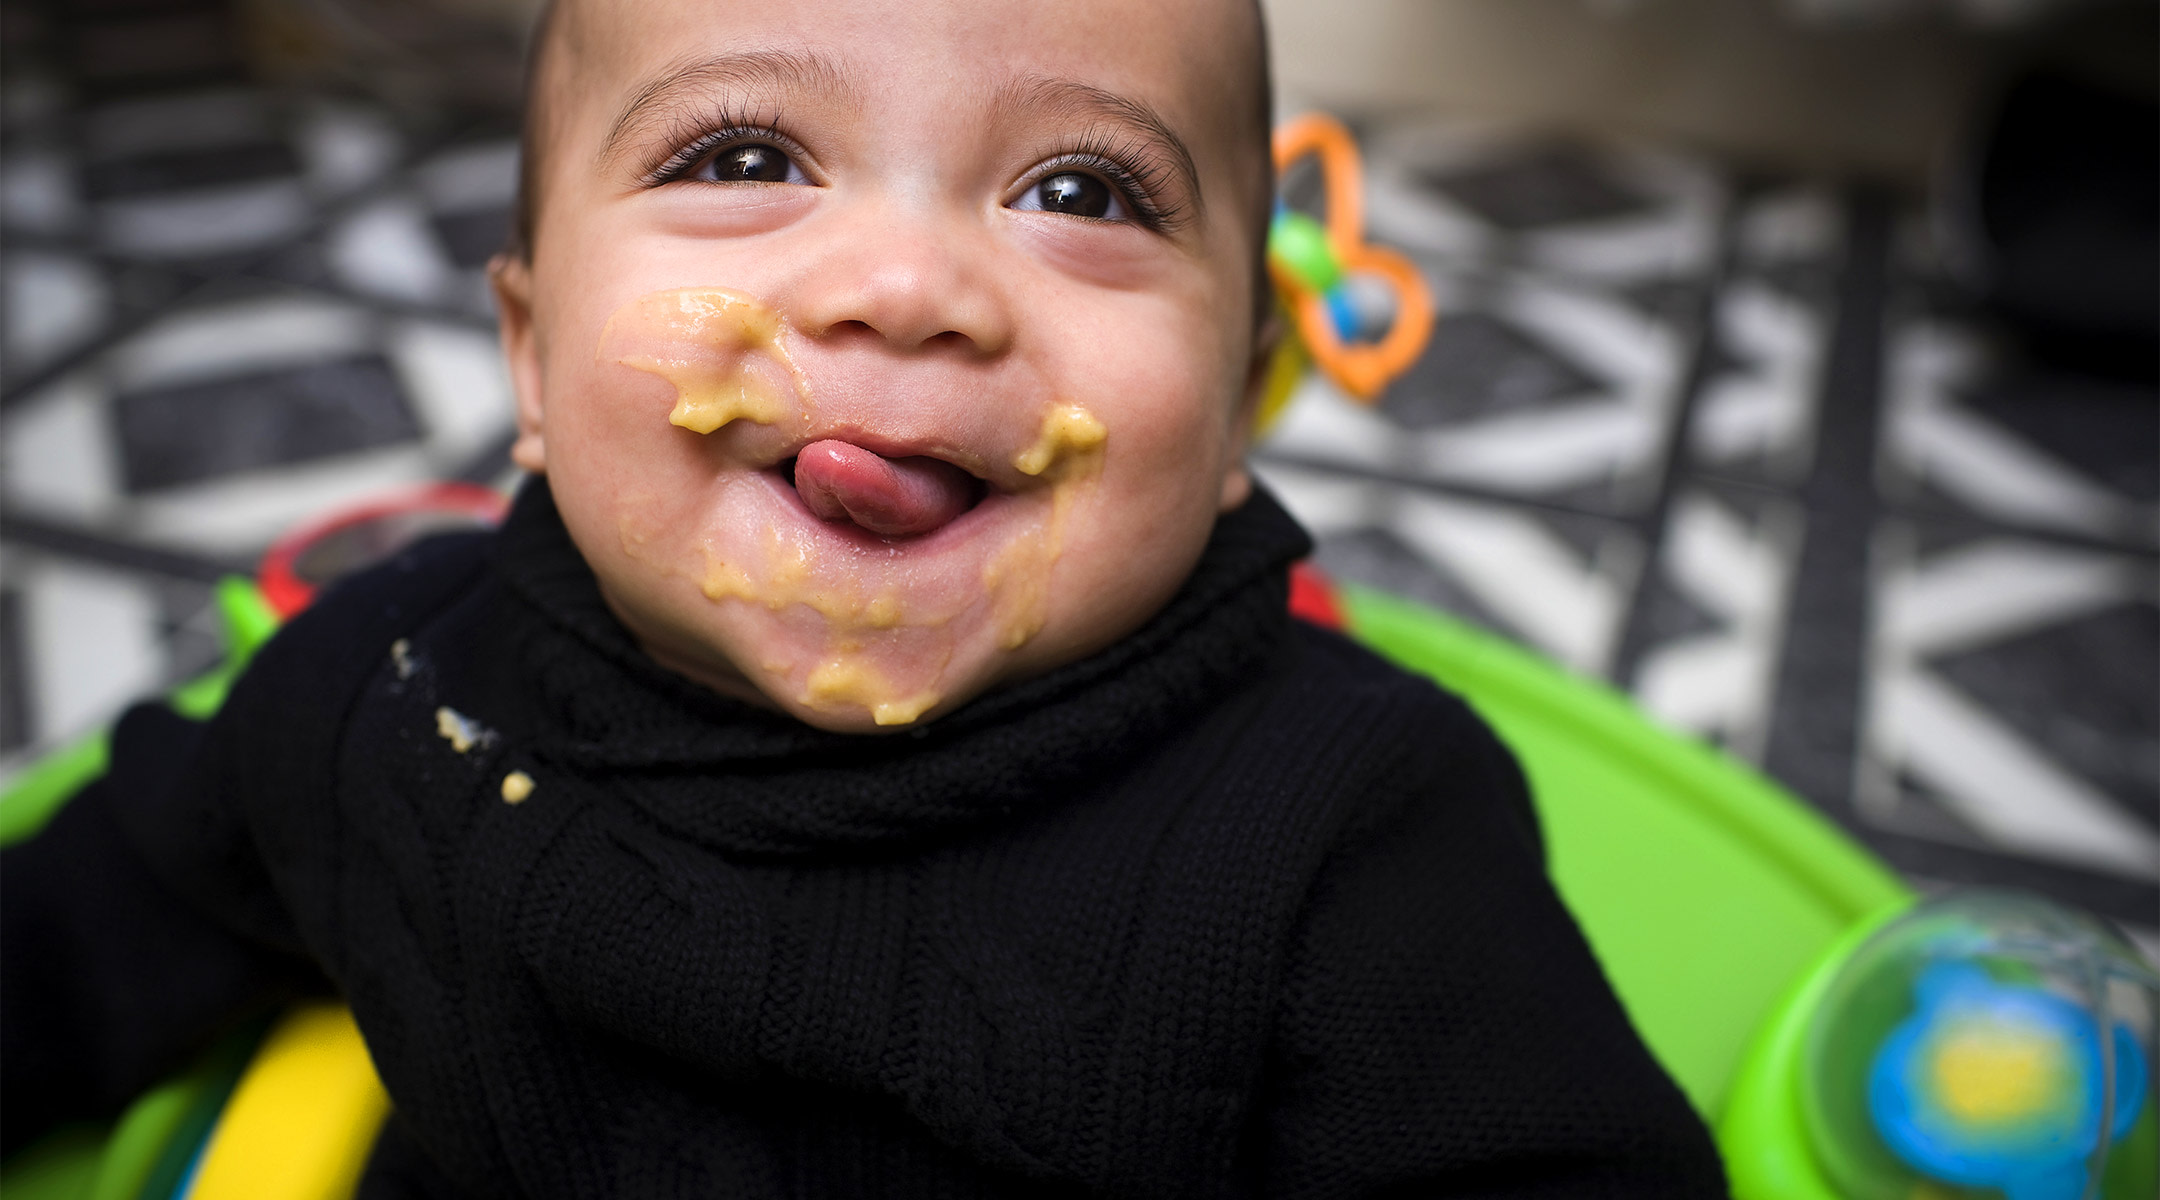 happy baby smiling and eating solid food